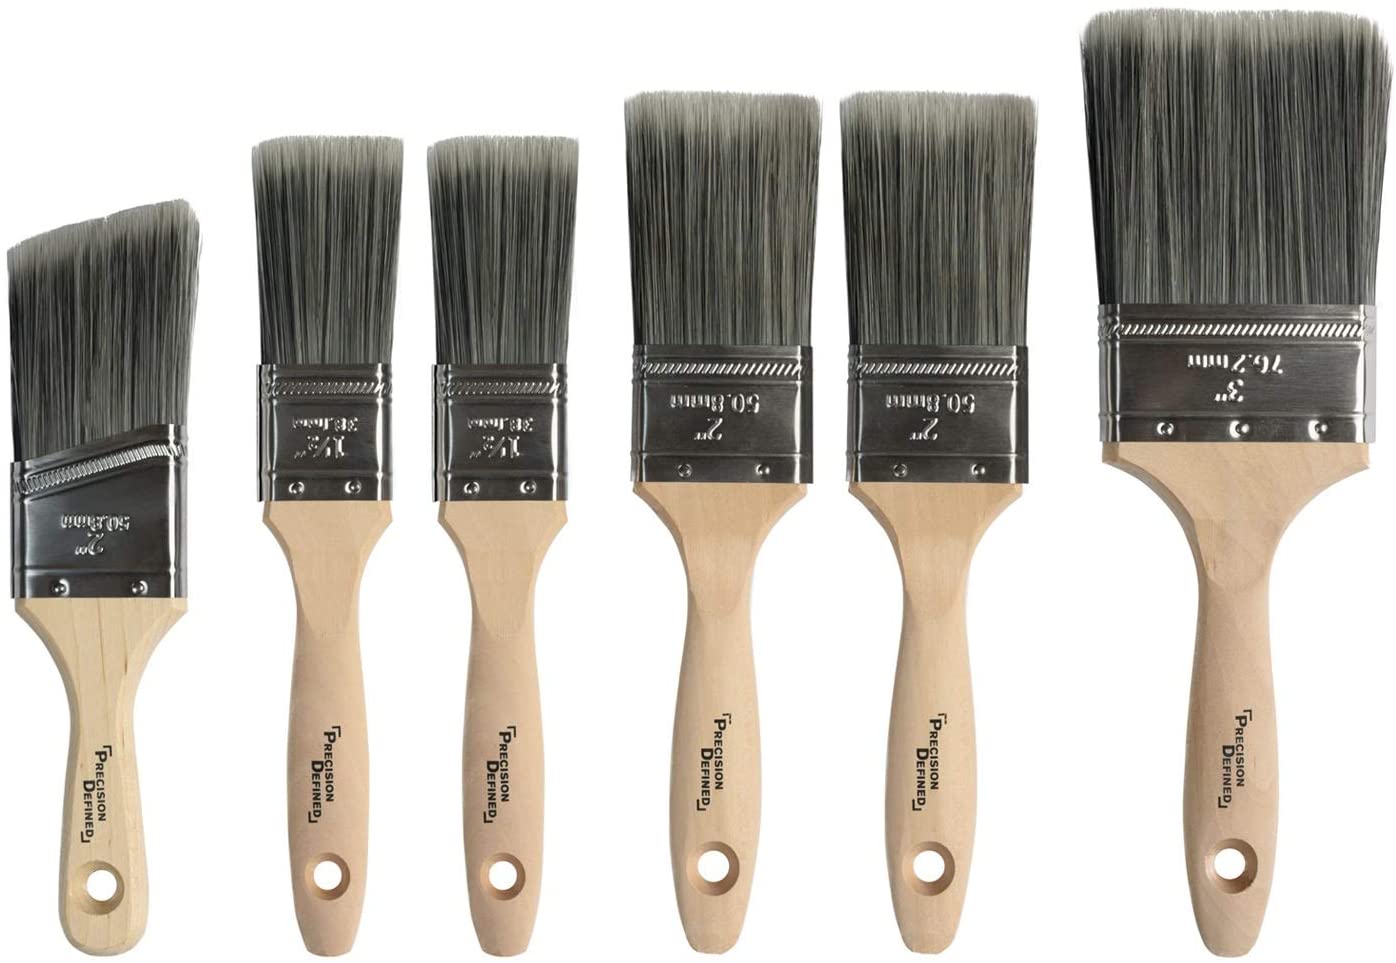 Precision Comfort Grip Paint Brushes For Home, 6-Piece